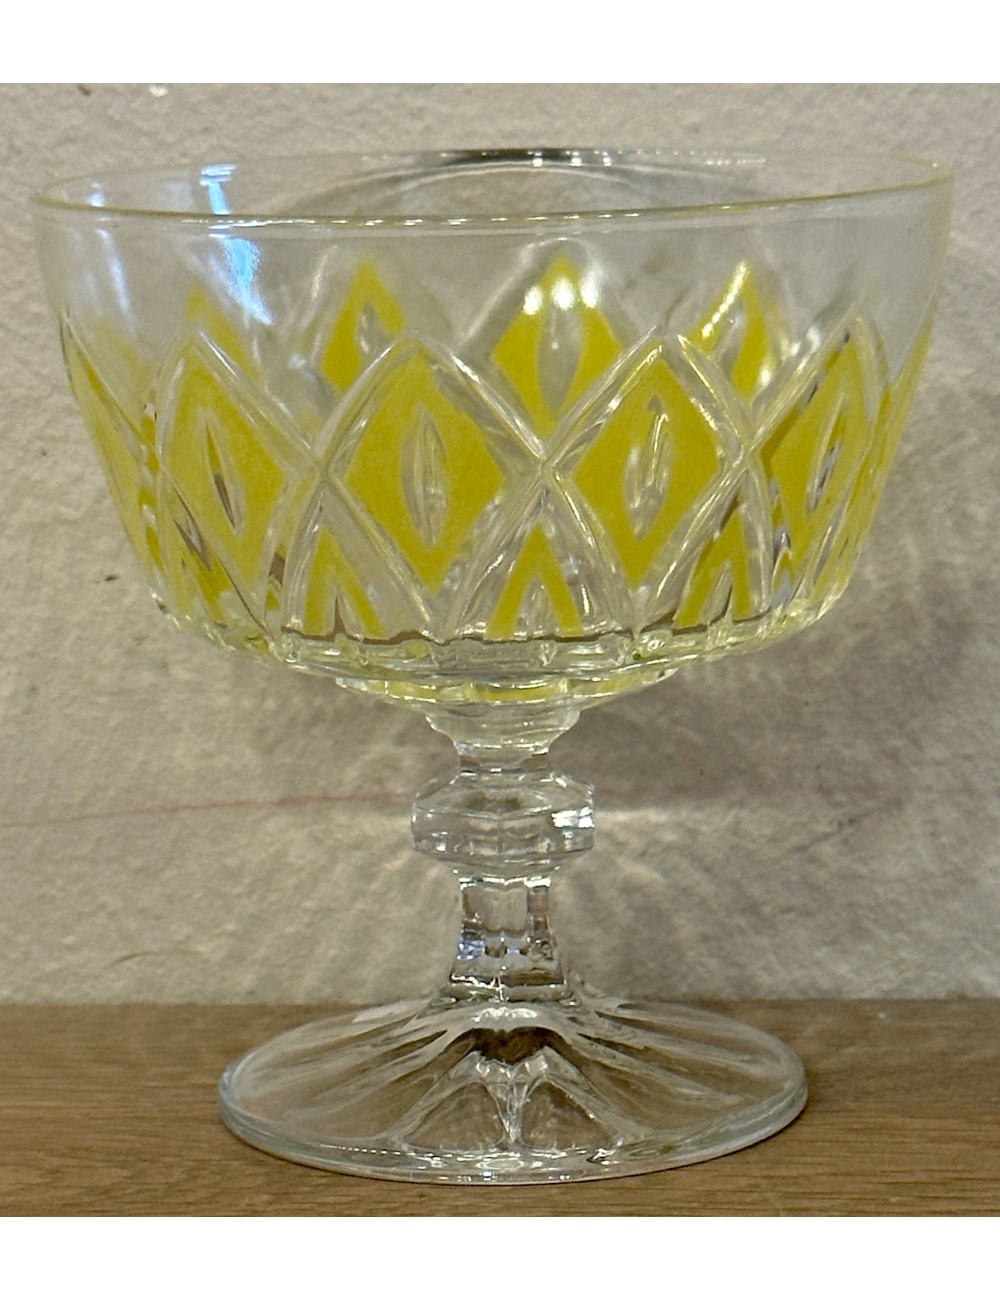 Ice cream coupe / Plate - VMC Reims (Verreries Mécanques Champenoises) - in yellow executed glass